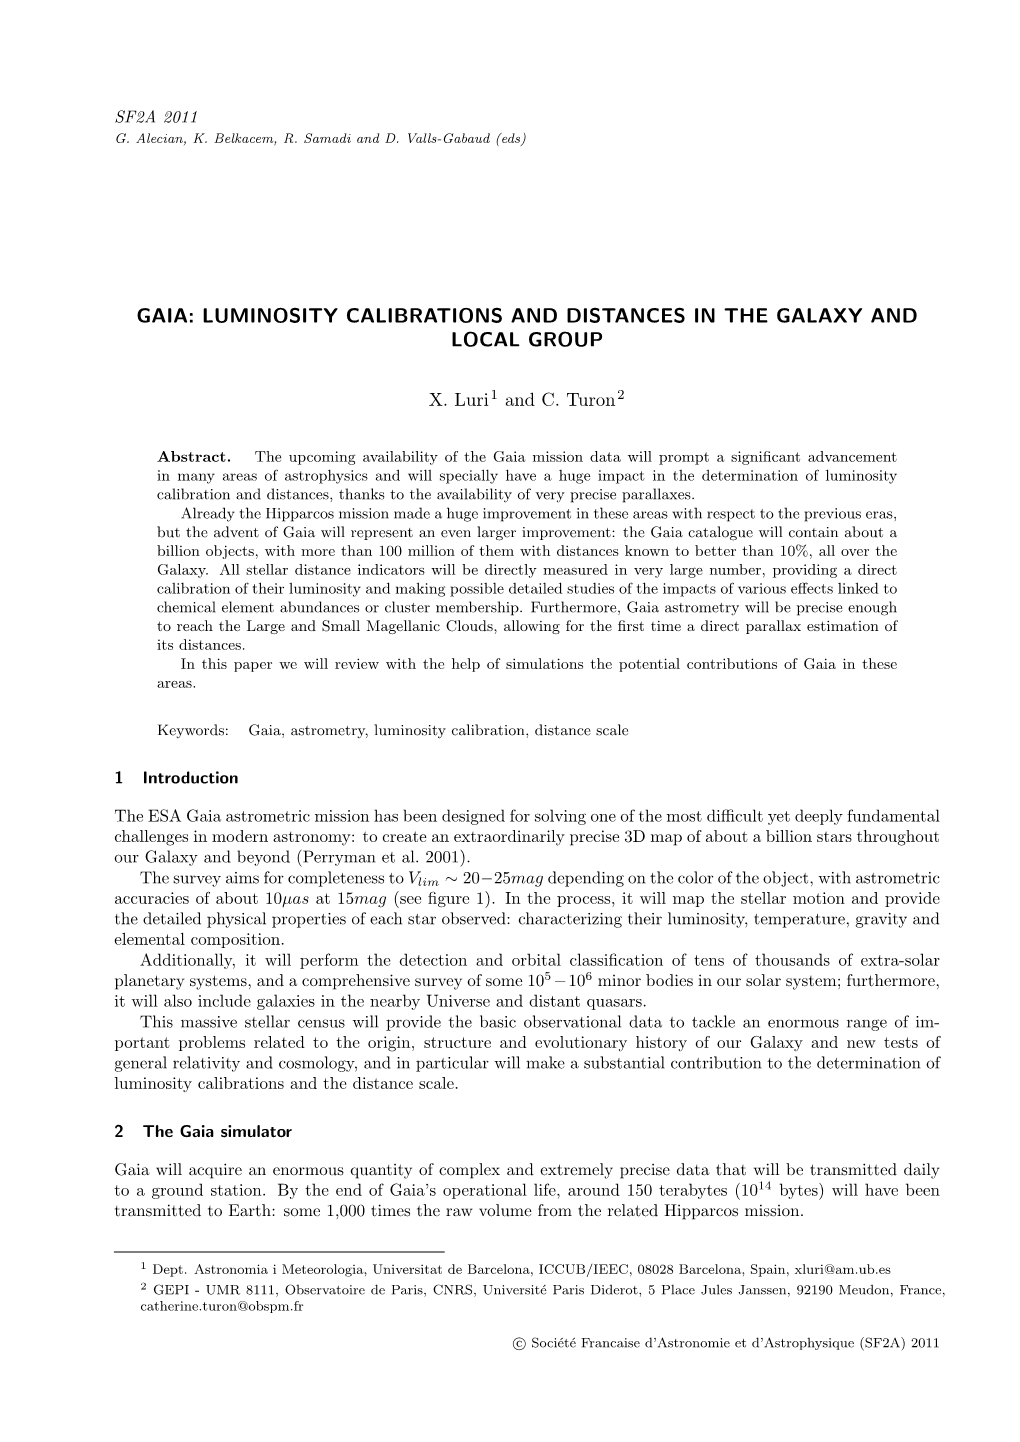 Gaia: Luminosity Calibrations and Distances in the Galaxy and Local Group